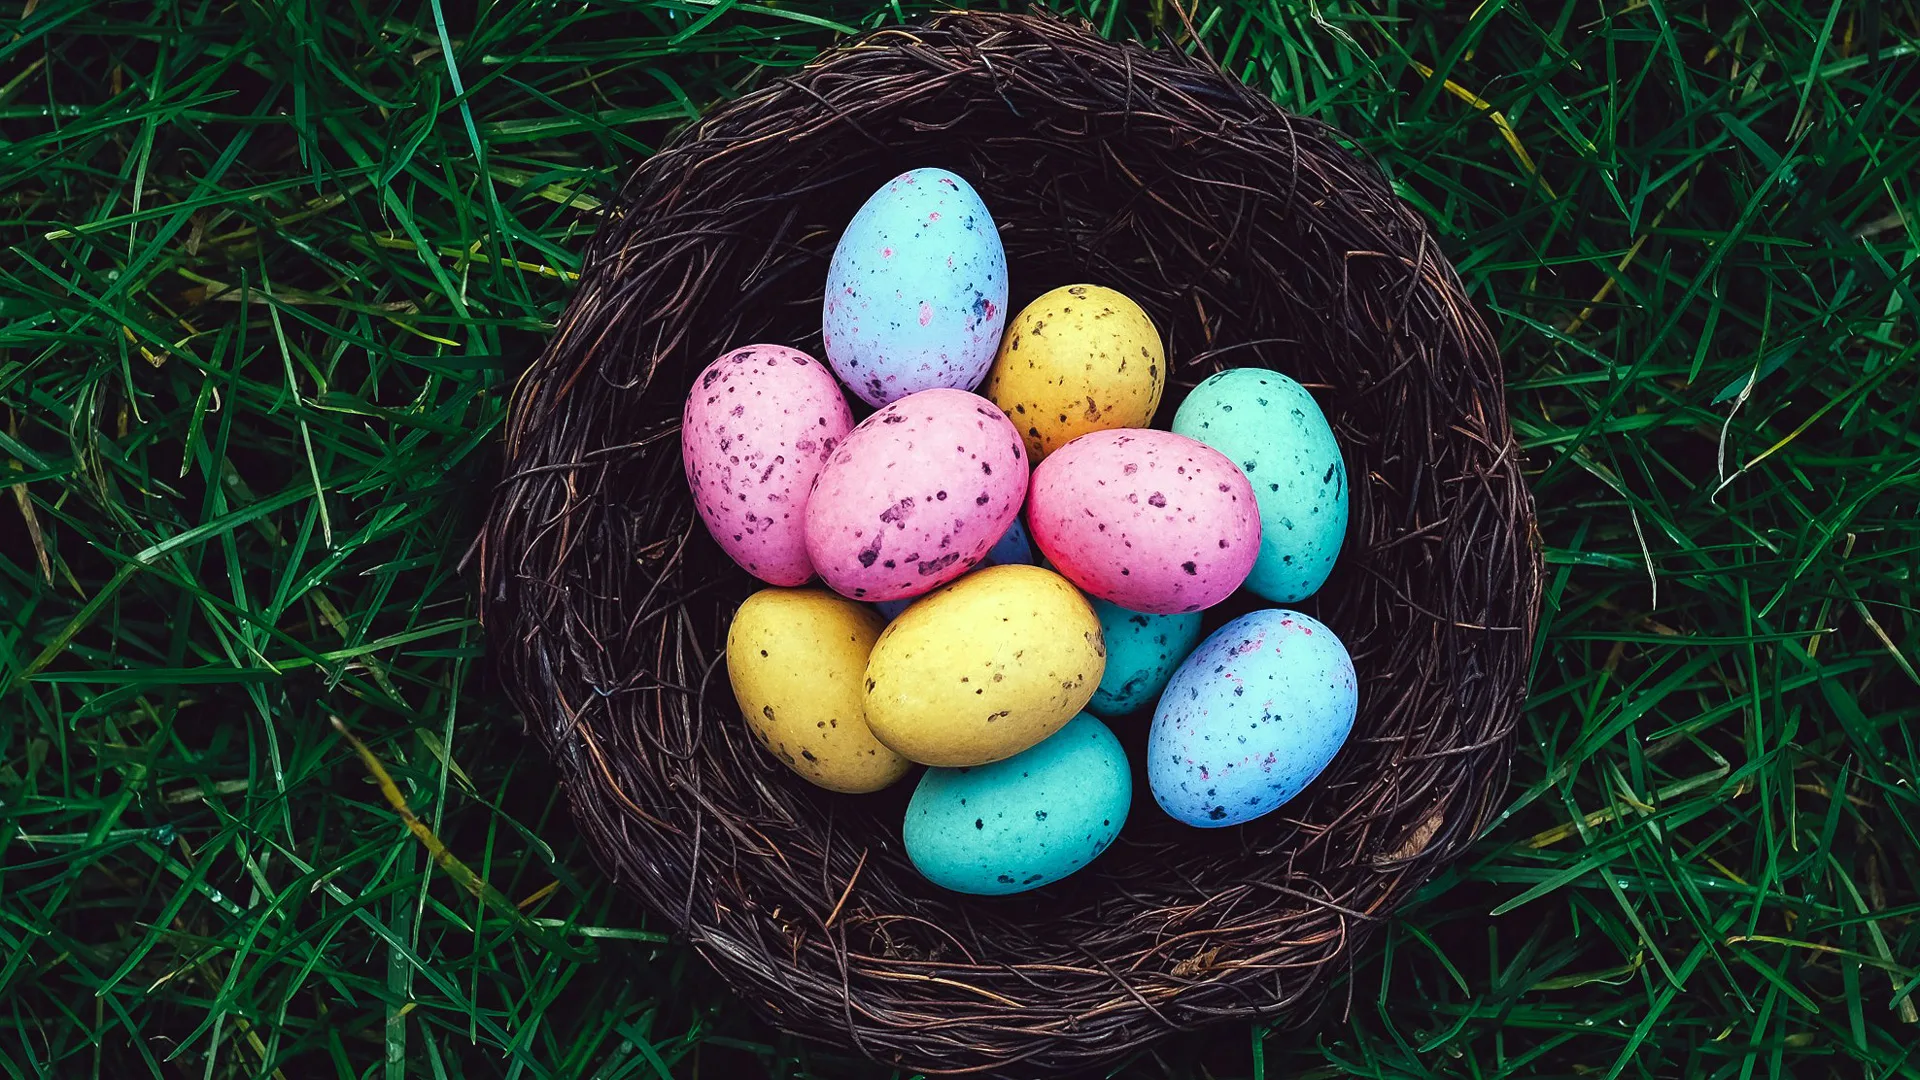 A close up photograph of colourful speckled eggs in a brown nest on a bed of green grass